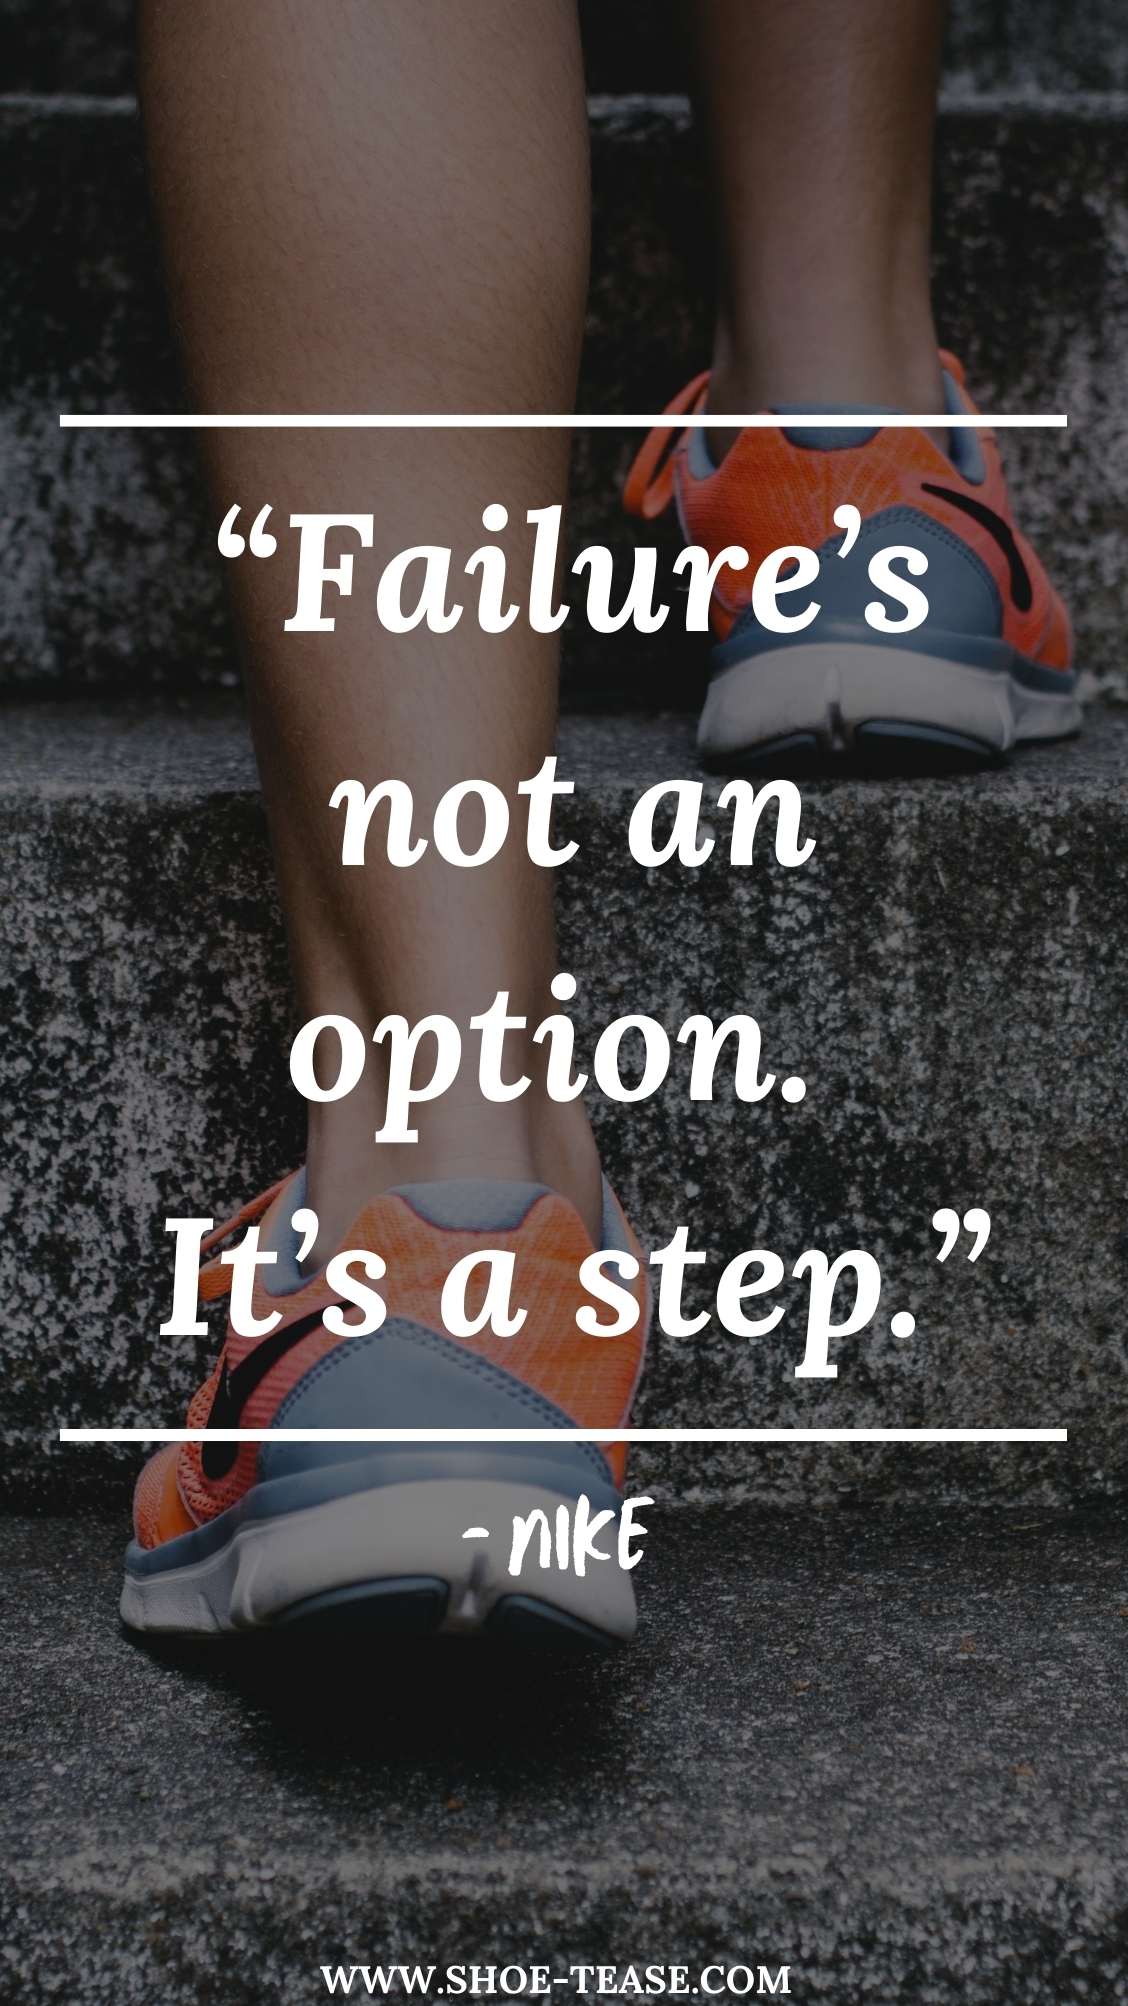 Nike Quote reading Failure's not and option. it's a step over 2 legs with orange and blue nike sneakers..